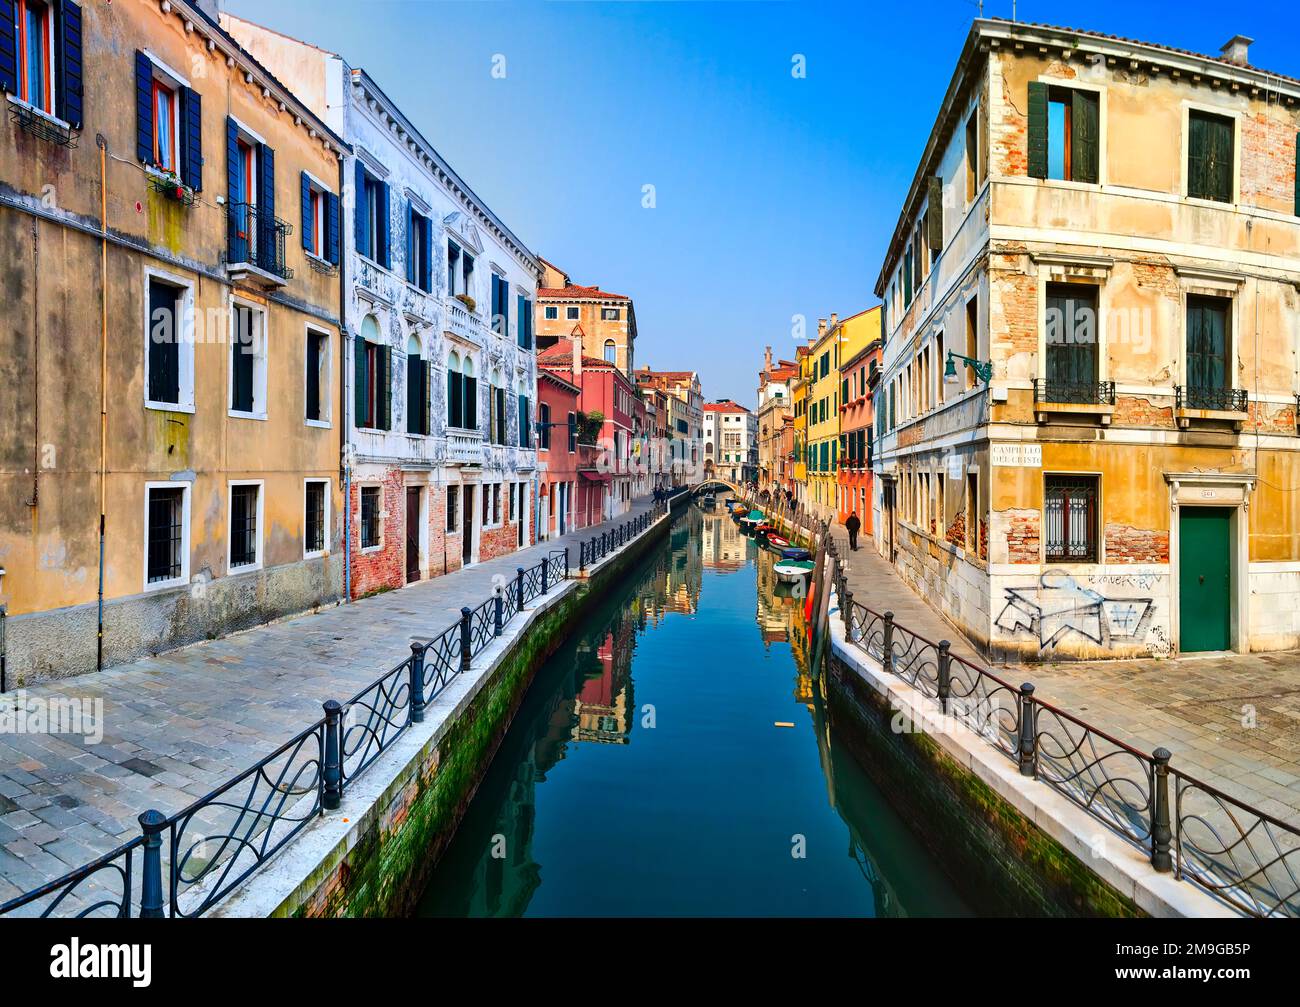 Water canal between buildings, Venice, Italy Stock Photo